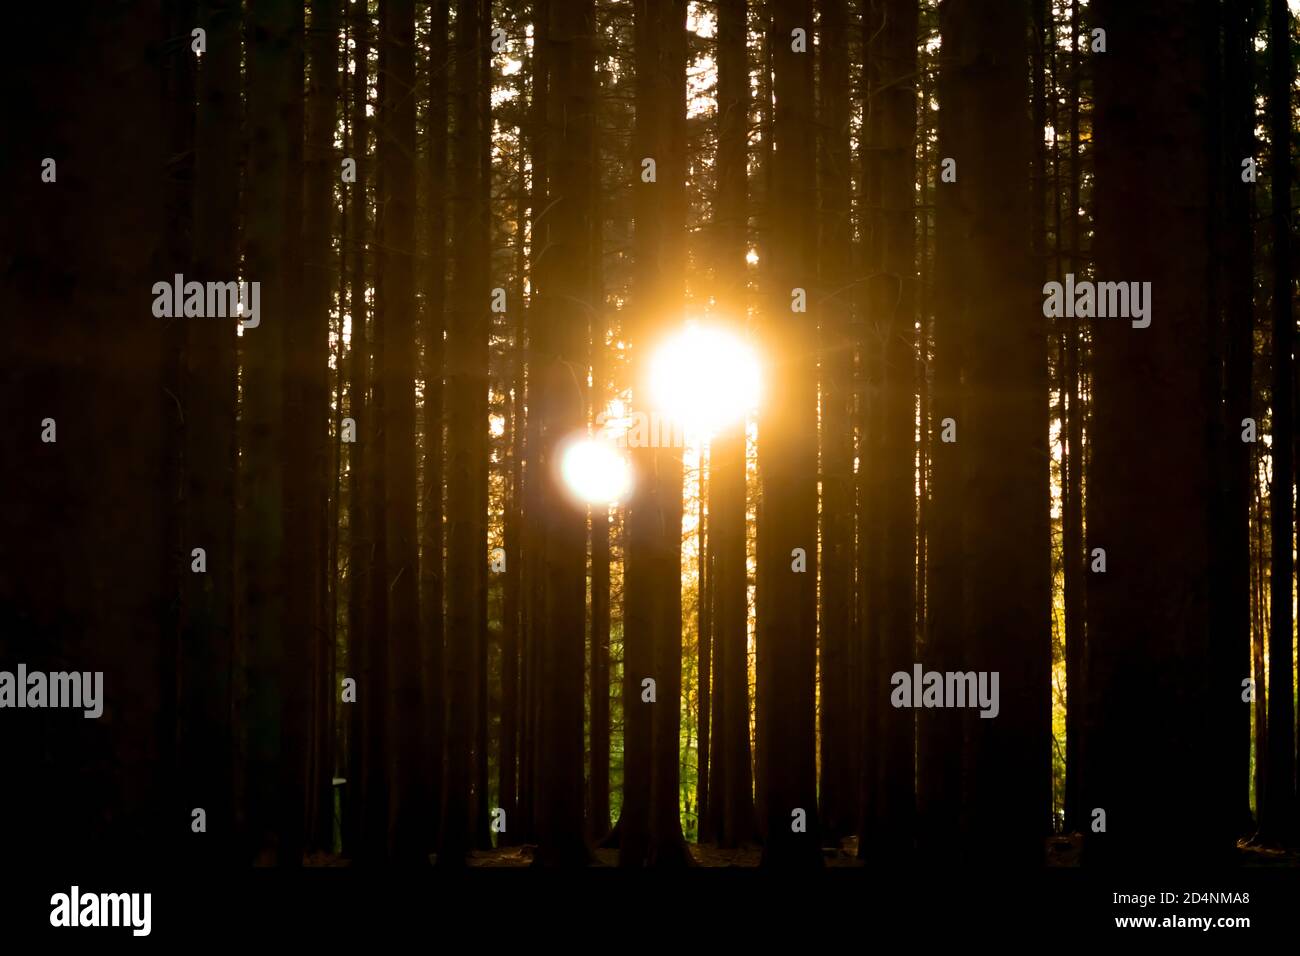 The Sunlight is shining trough the forest trees Stock Photo